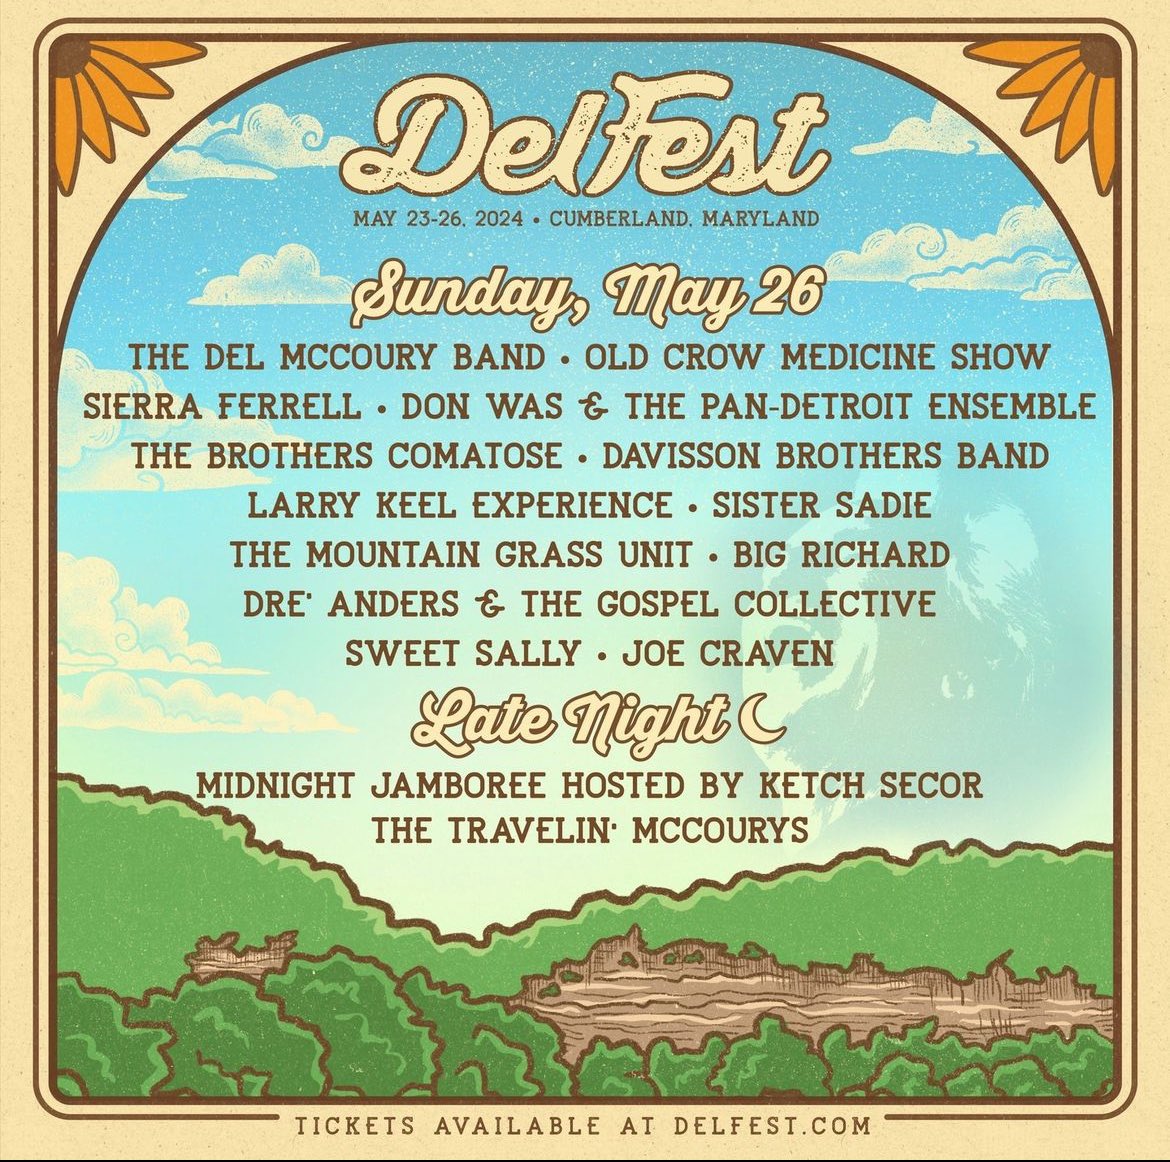 Pickin' and grinnin' thinking about @DelFest ahead. The schedules are out and we play on Sunday, May 26th. Head to delfest.com for more info or to grab tickets. #delyeah